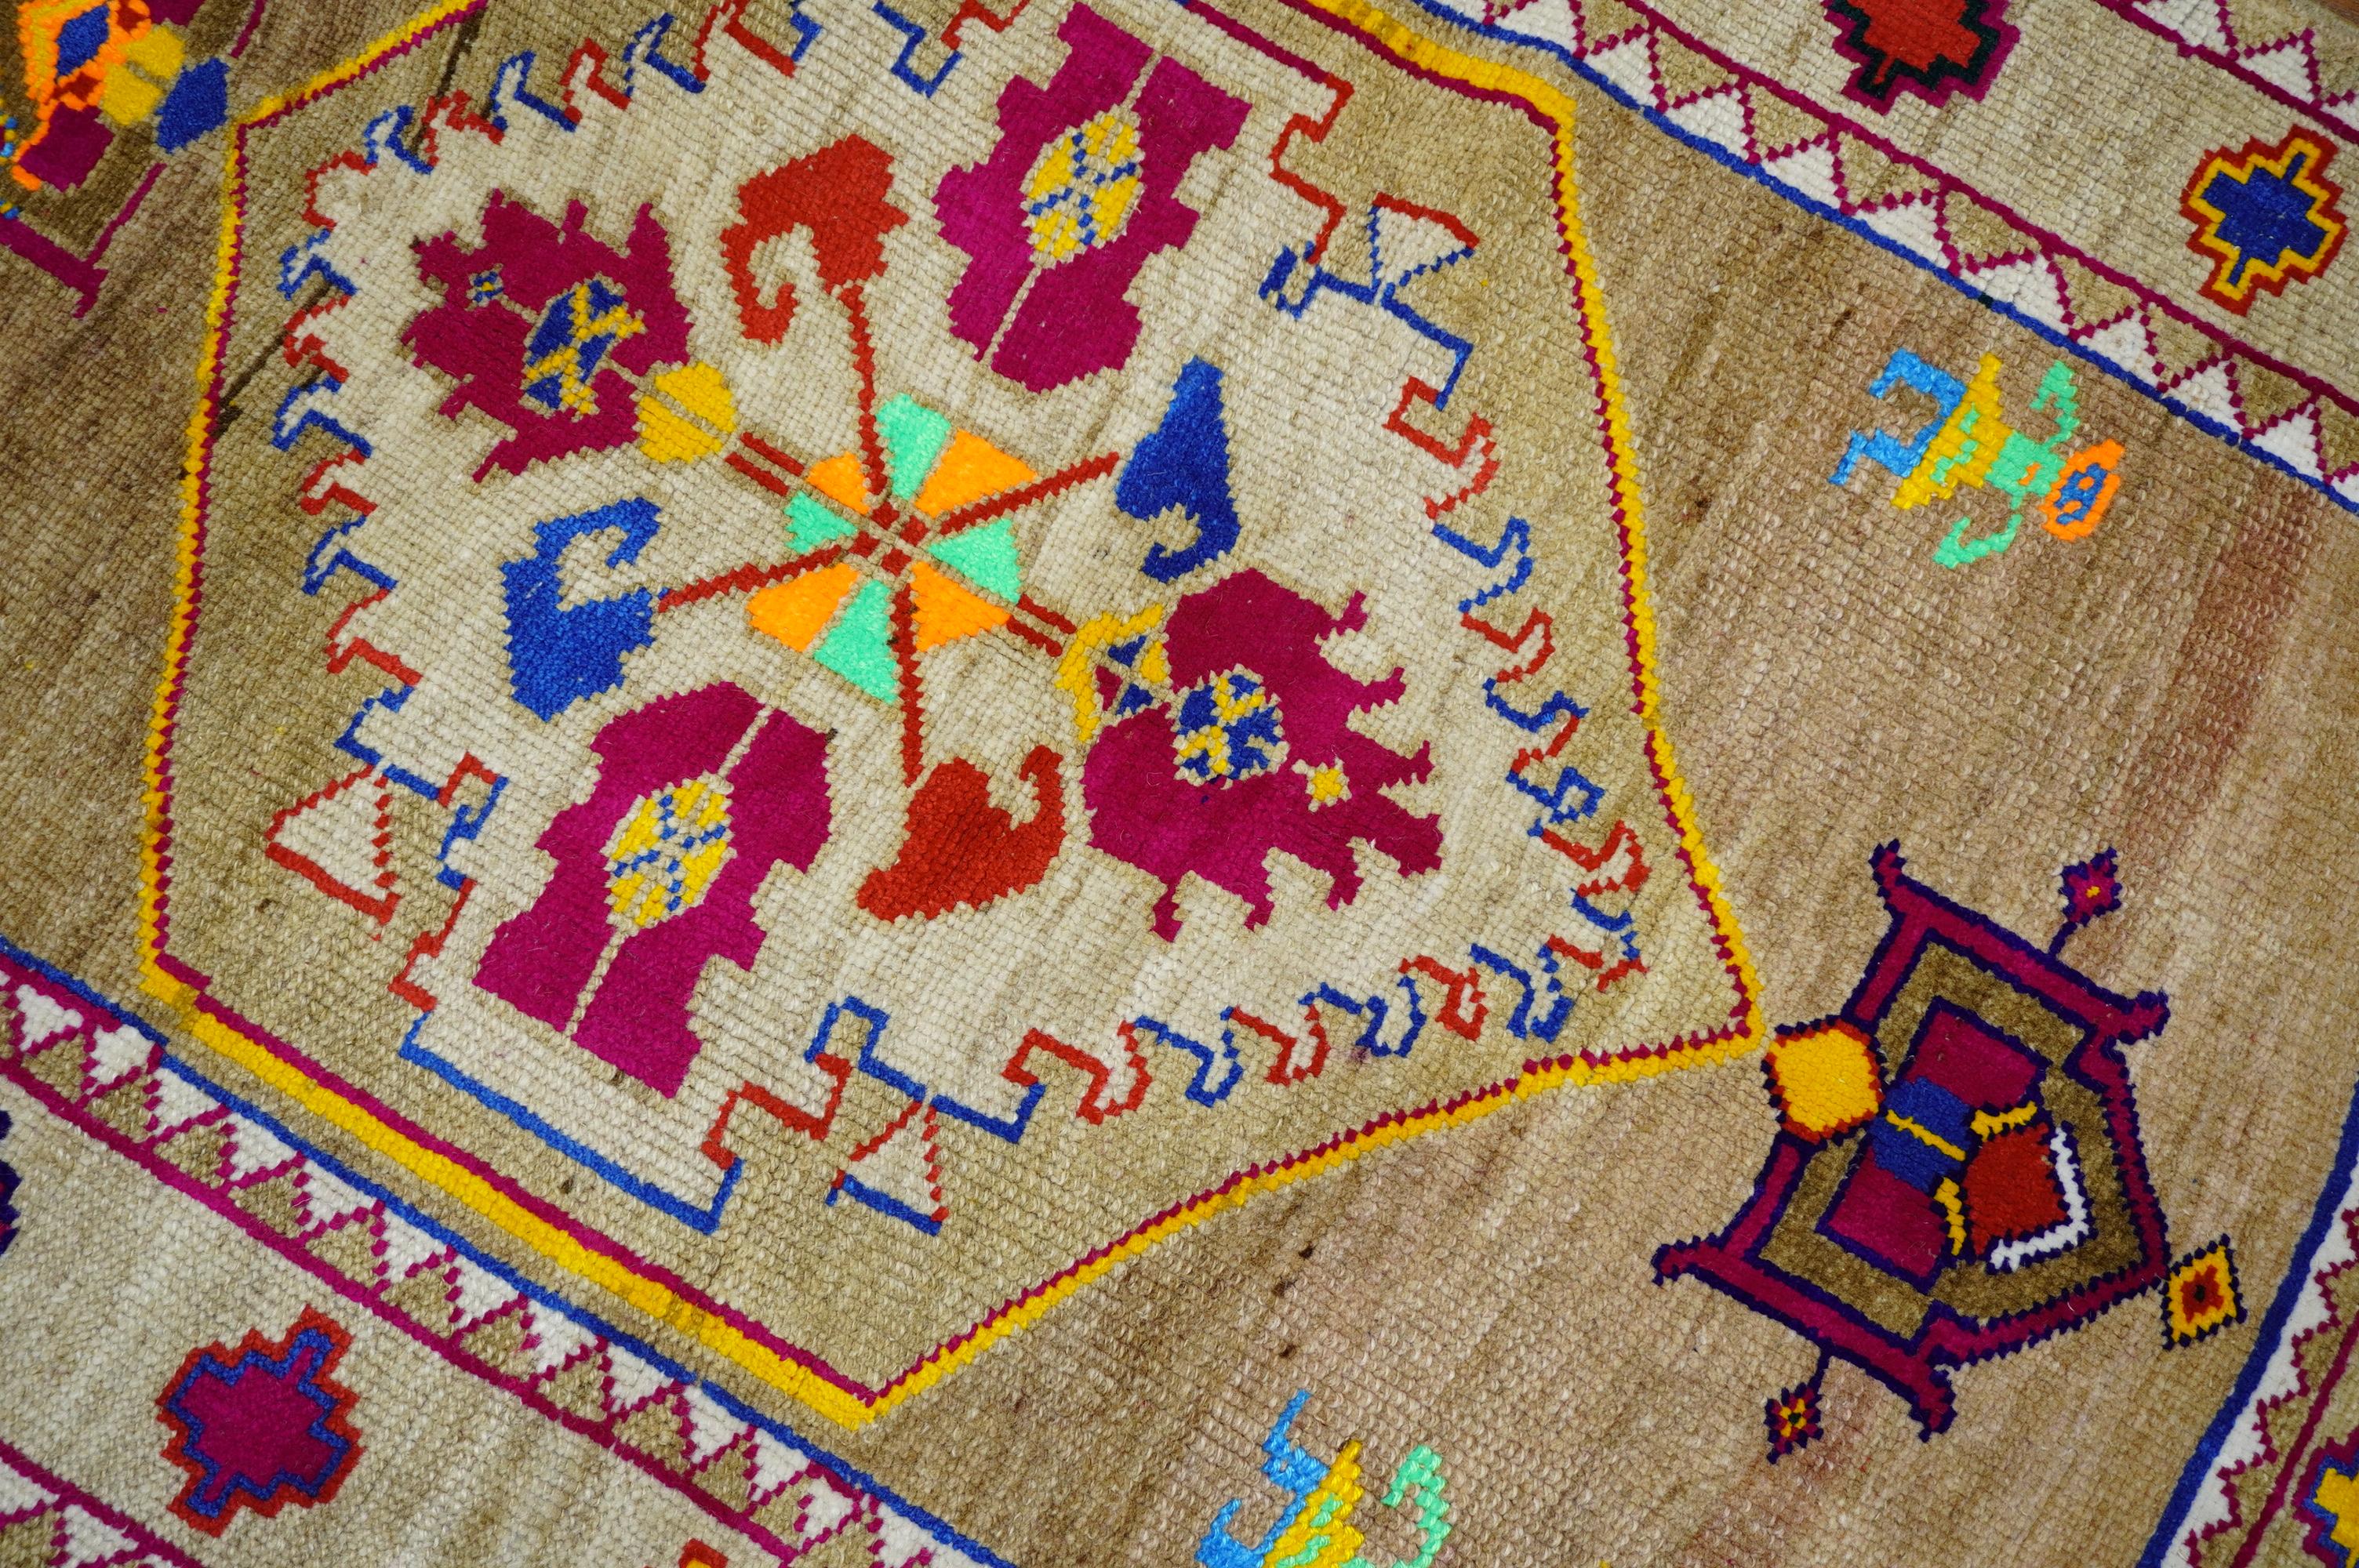 A one of a kind Boutique looking hand knotted scatter size vintage Turkish rug featuring bright cotton accents in dominant orange, yellow, violet orange blue and neon green on a brown field hovered by a large medallion and 2 humans. The accent